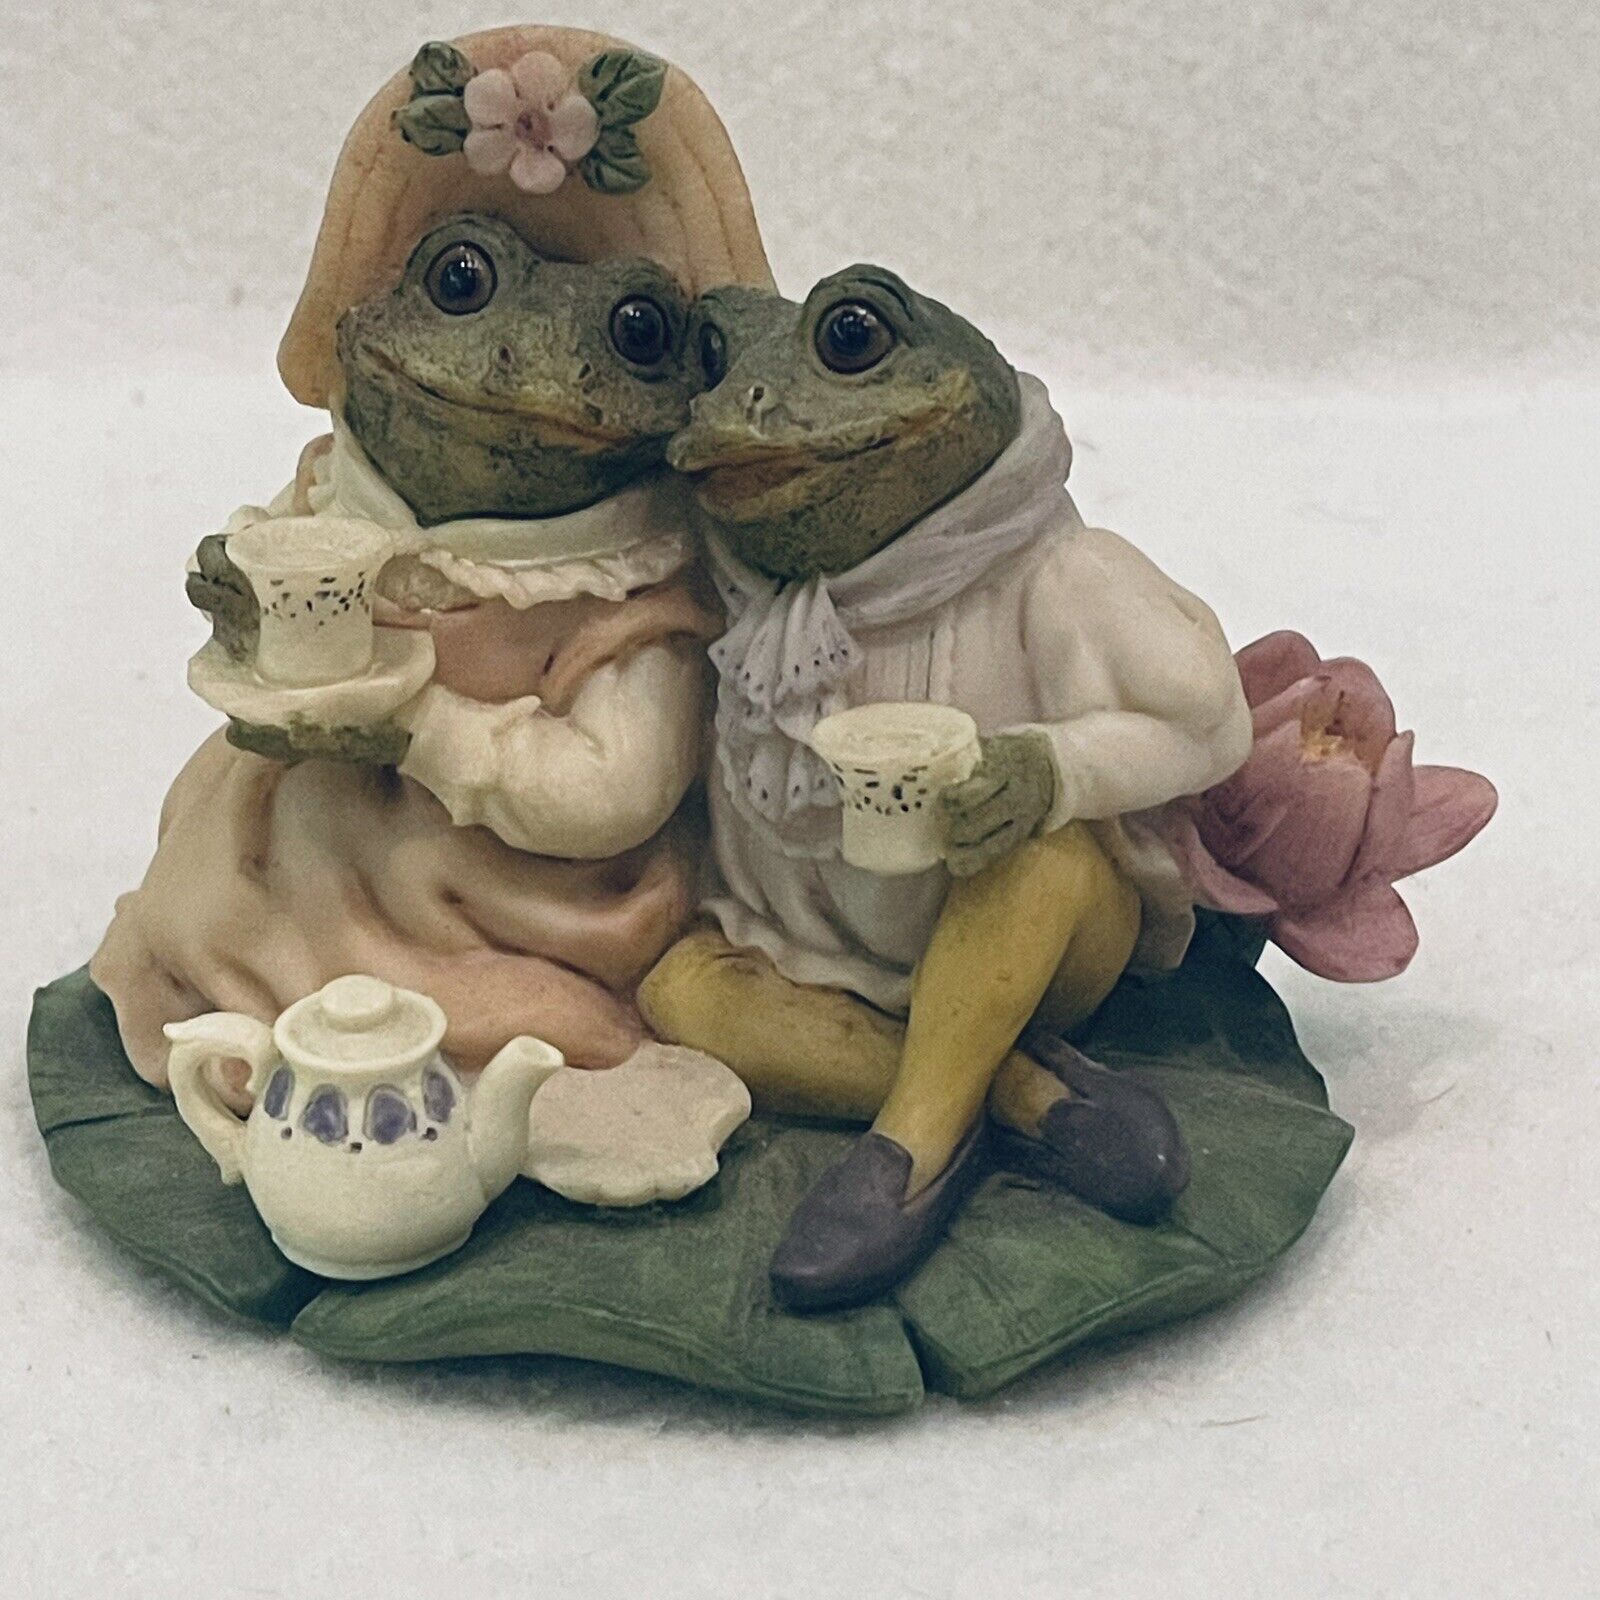 Frog Fantasy Tea For Two 1996 Westland Handcrafted Figurine